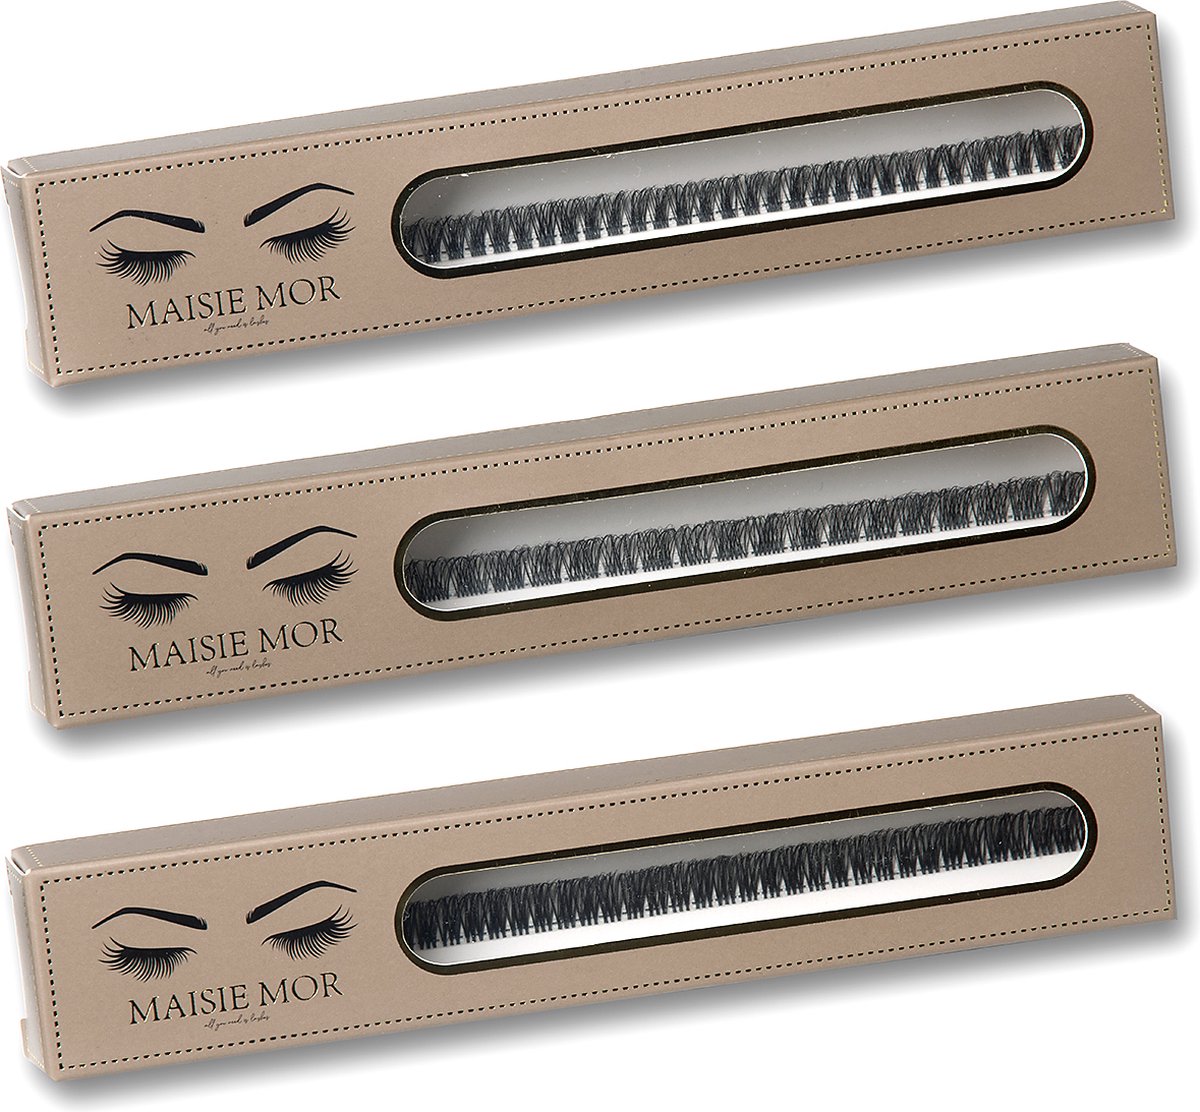 Maisie Mor - Bundel Pretty - Nepwimpers - Wimperextensions - Cluster Lashes - Wimpers